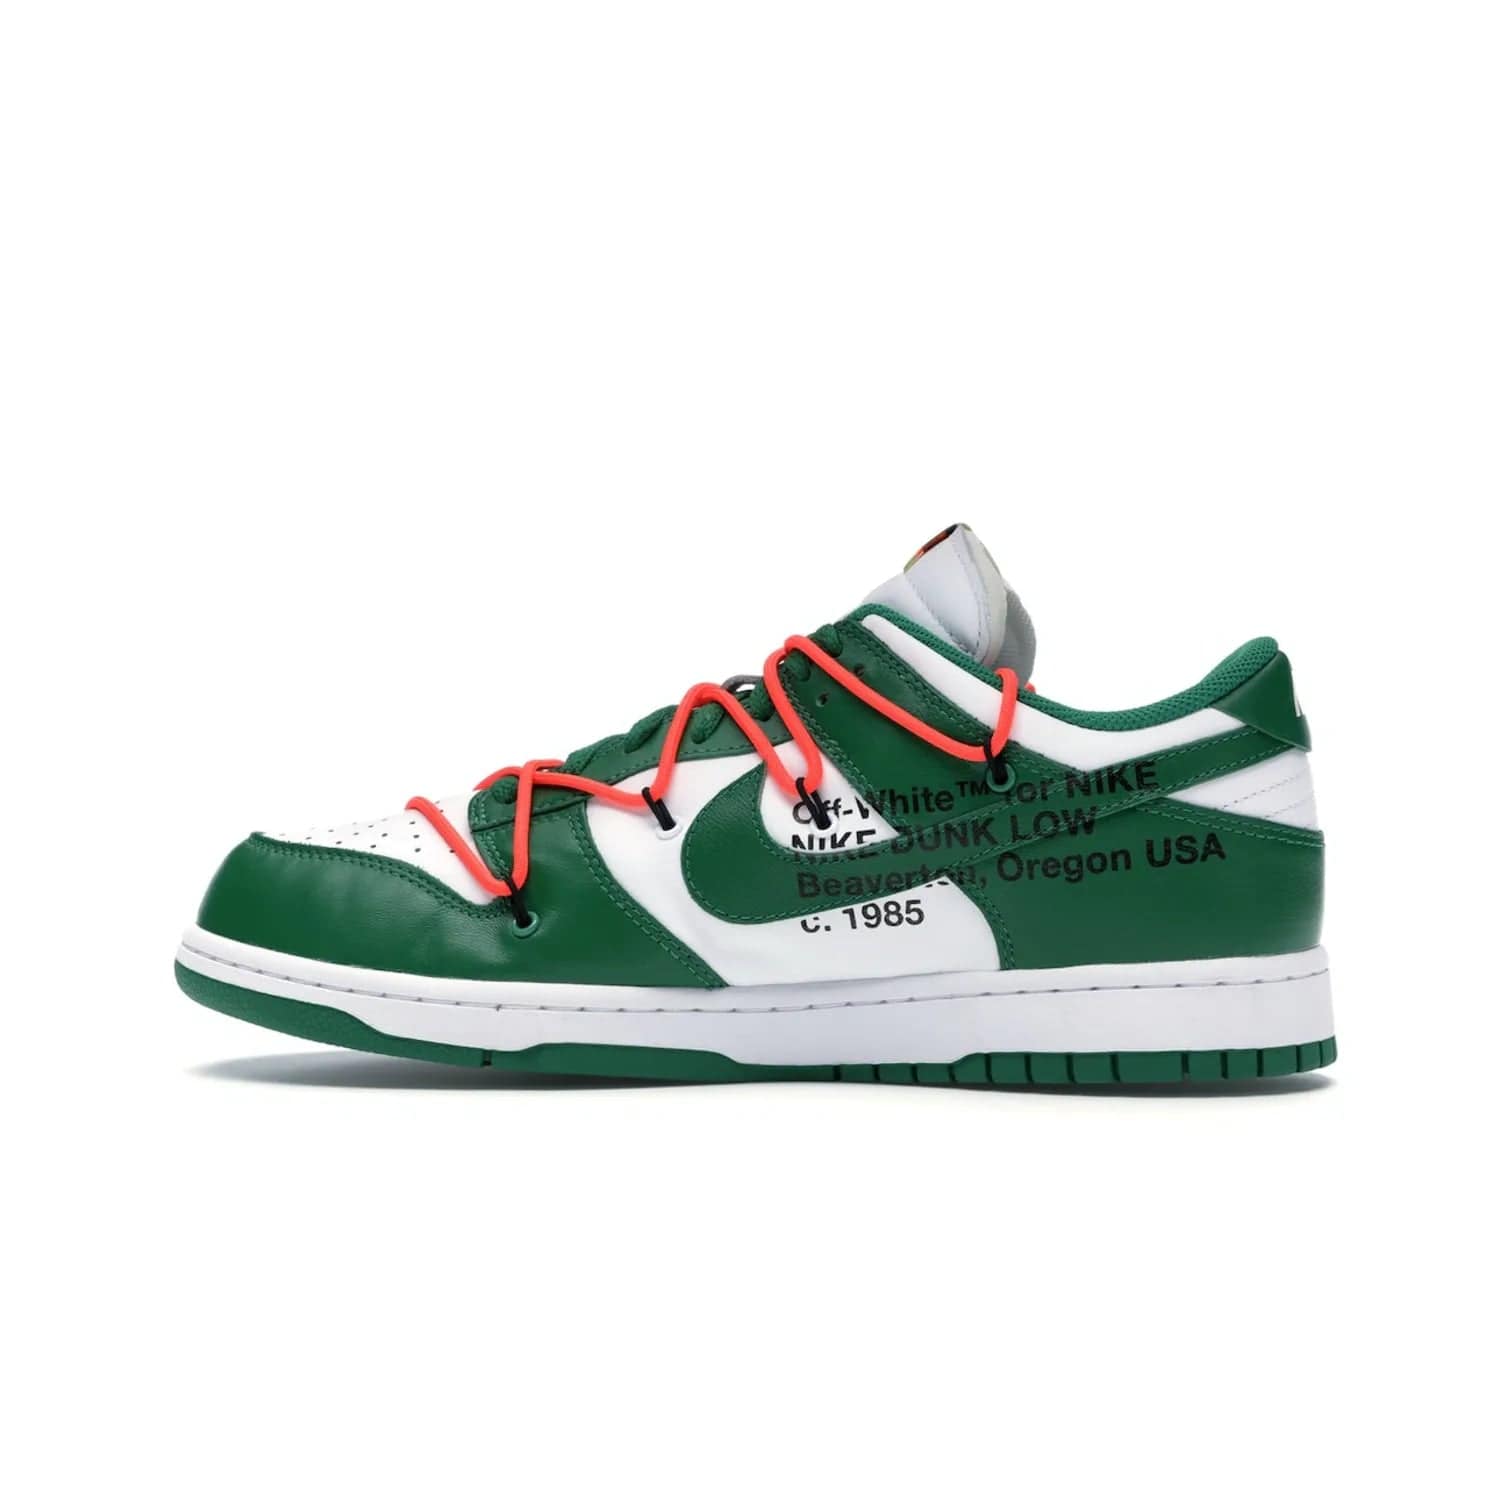 Nike Dunk Low Off-White Pine Green - Image 20 - Only at www.BallersClubKickz.com - The Nike Dunk Low Off-White Pine Green combines classic 1980s style with modern-day design. Featuring white leather uppers and pine green overlays, these classic kicks feature secondary lacing system, zip-ties and signature Off-White text. Releasing in December 2019, these shoes are a timeless classic for any wardrobe.